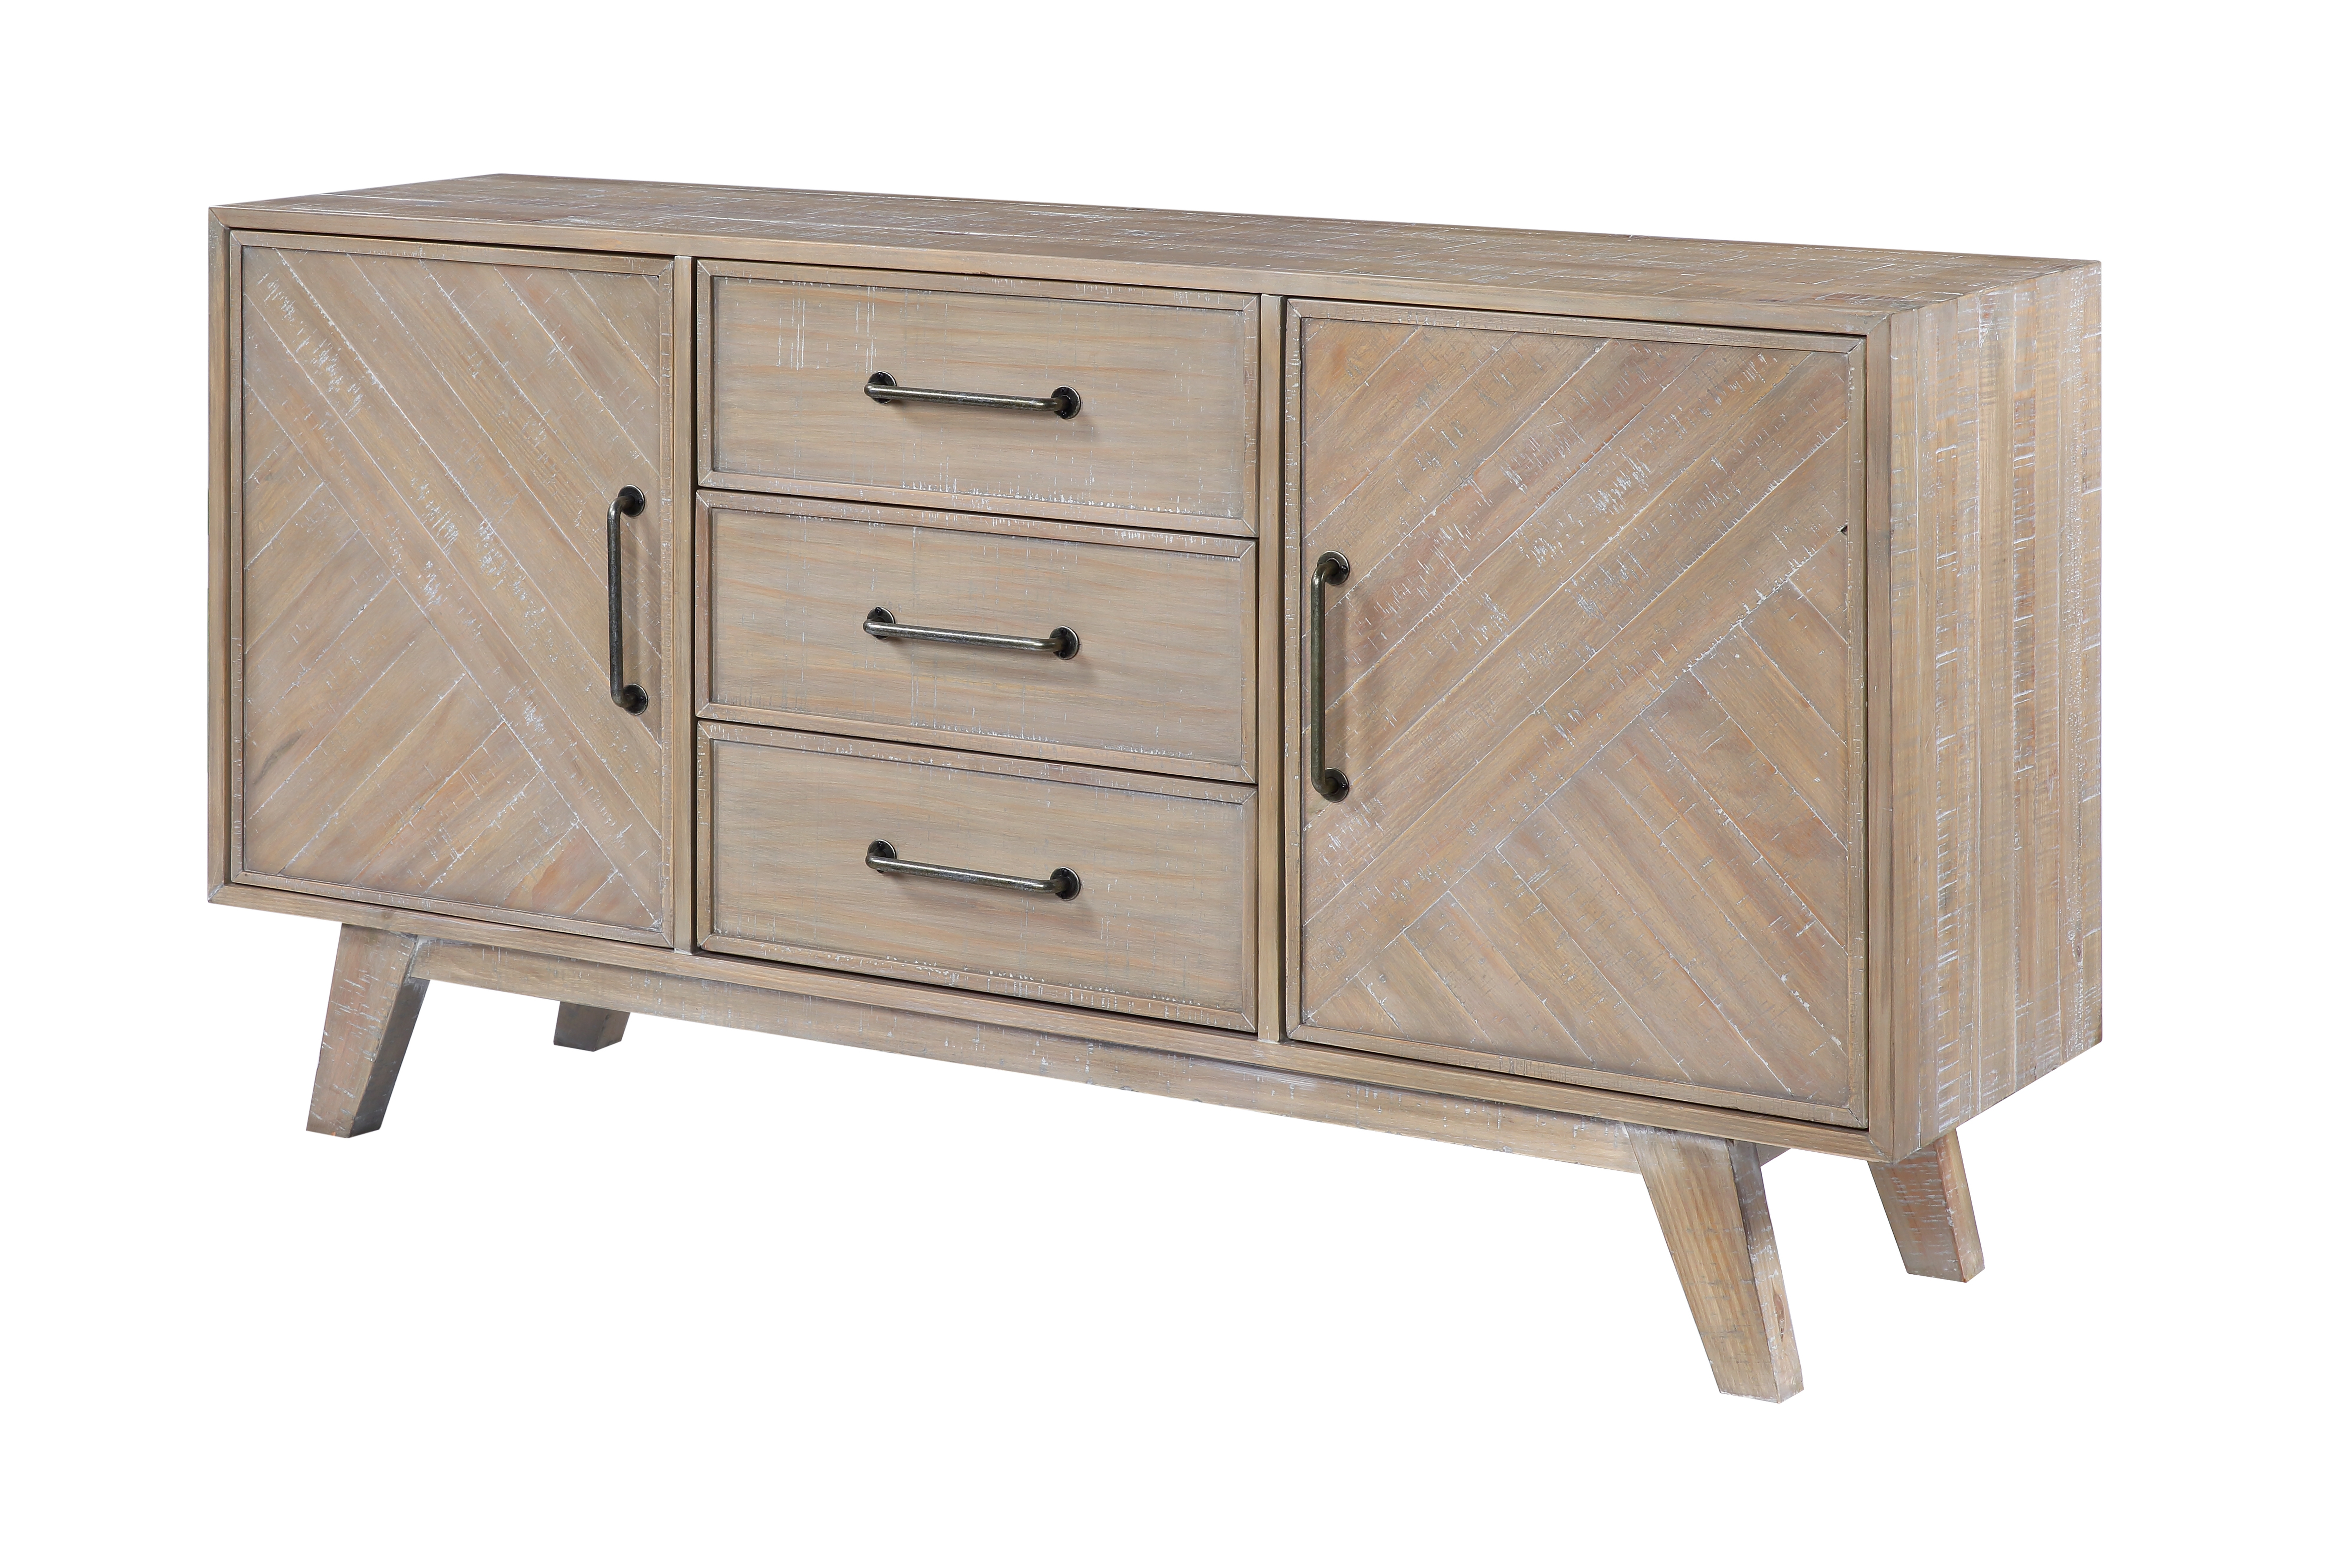 Barrister Three Drawer Two Door Credenza - Barrister Distressed - Sycamore Home